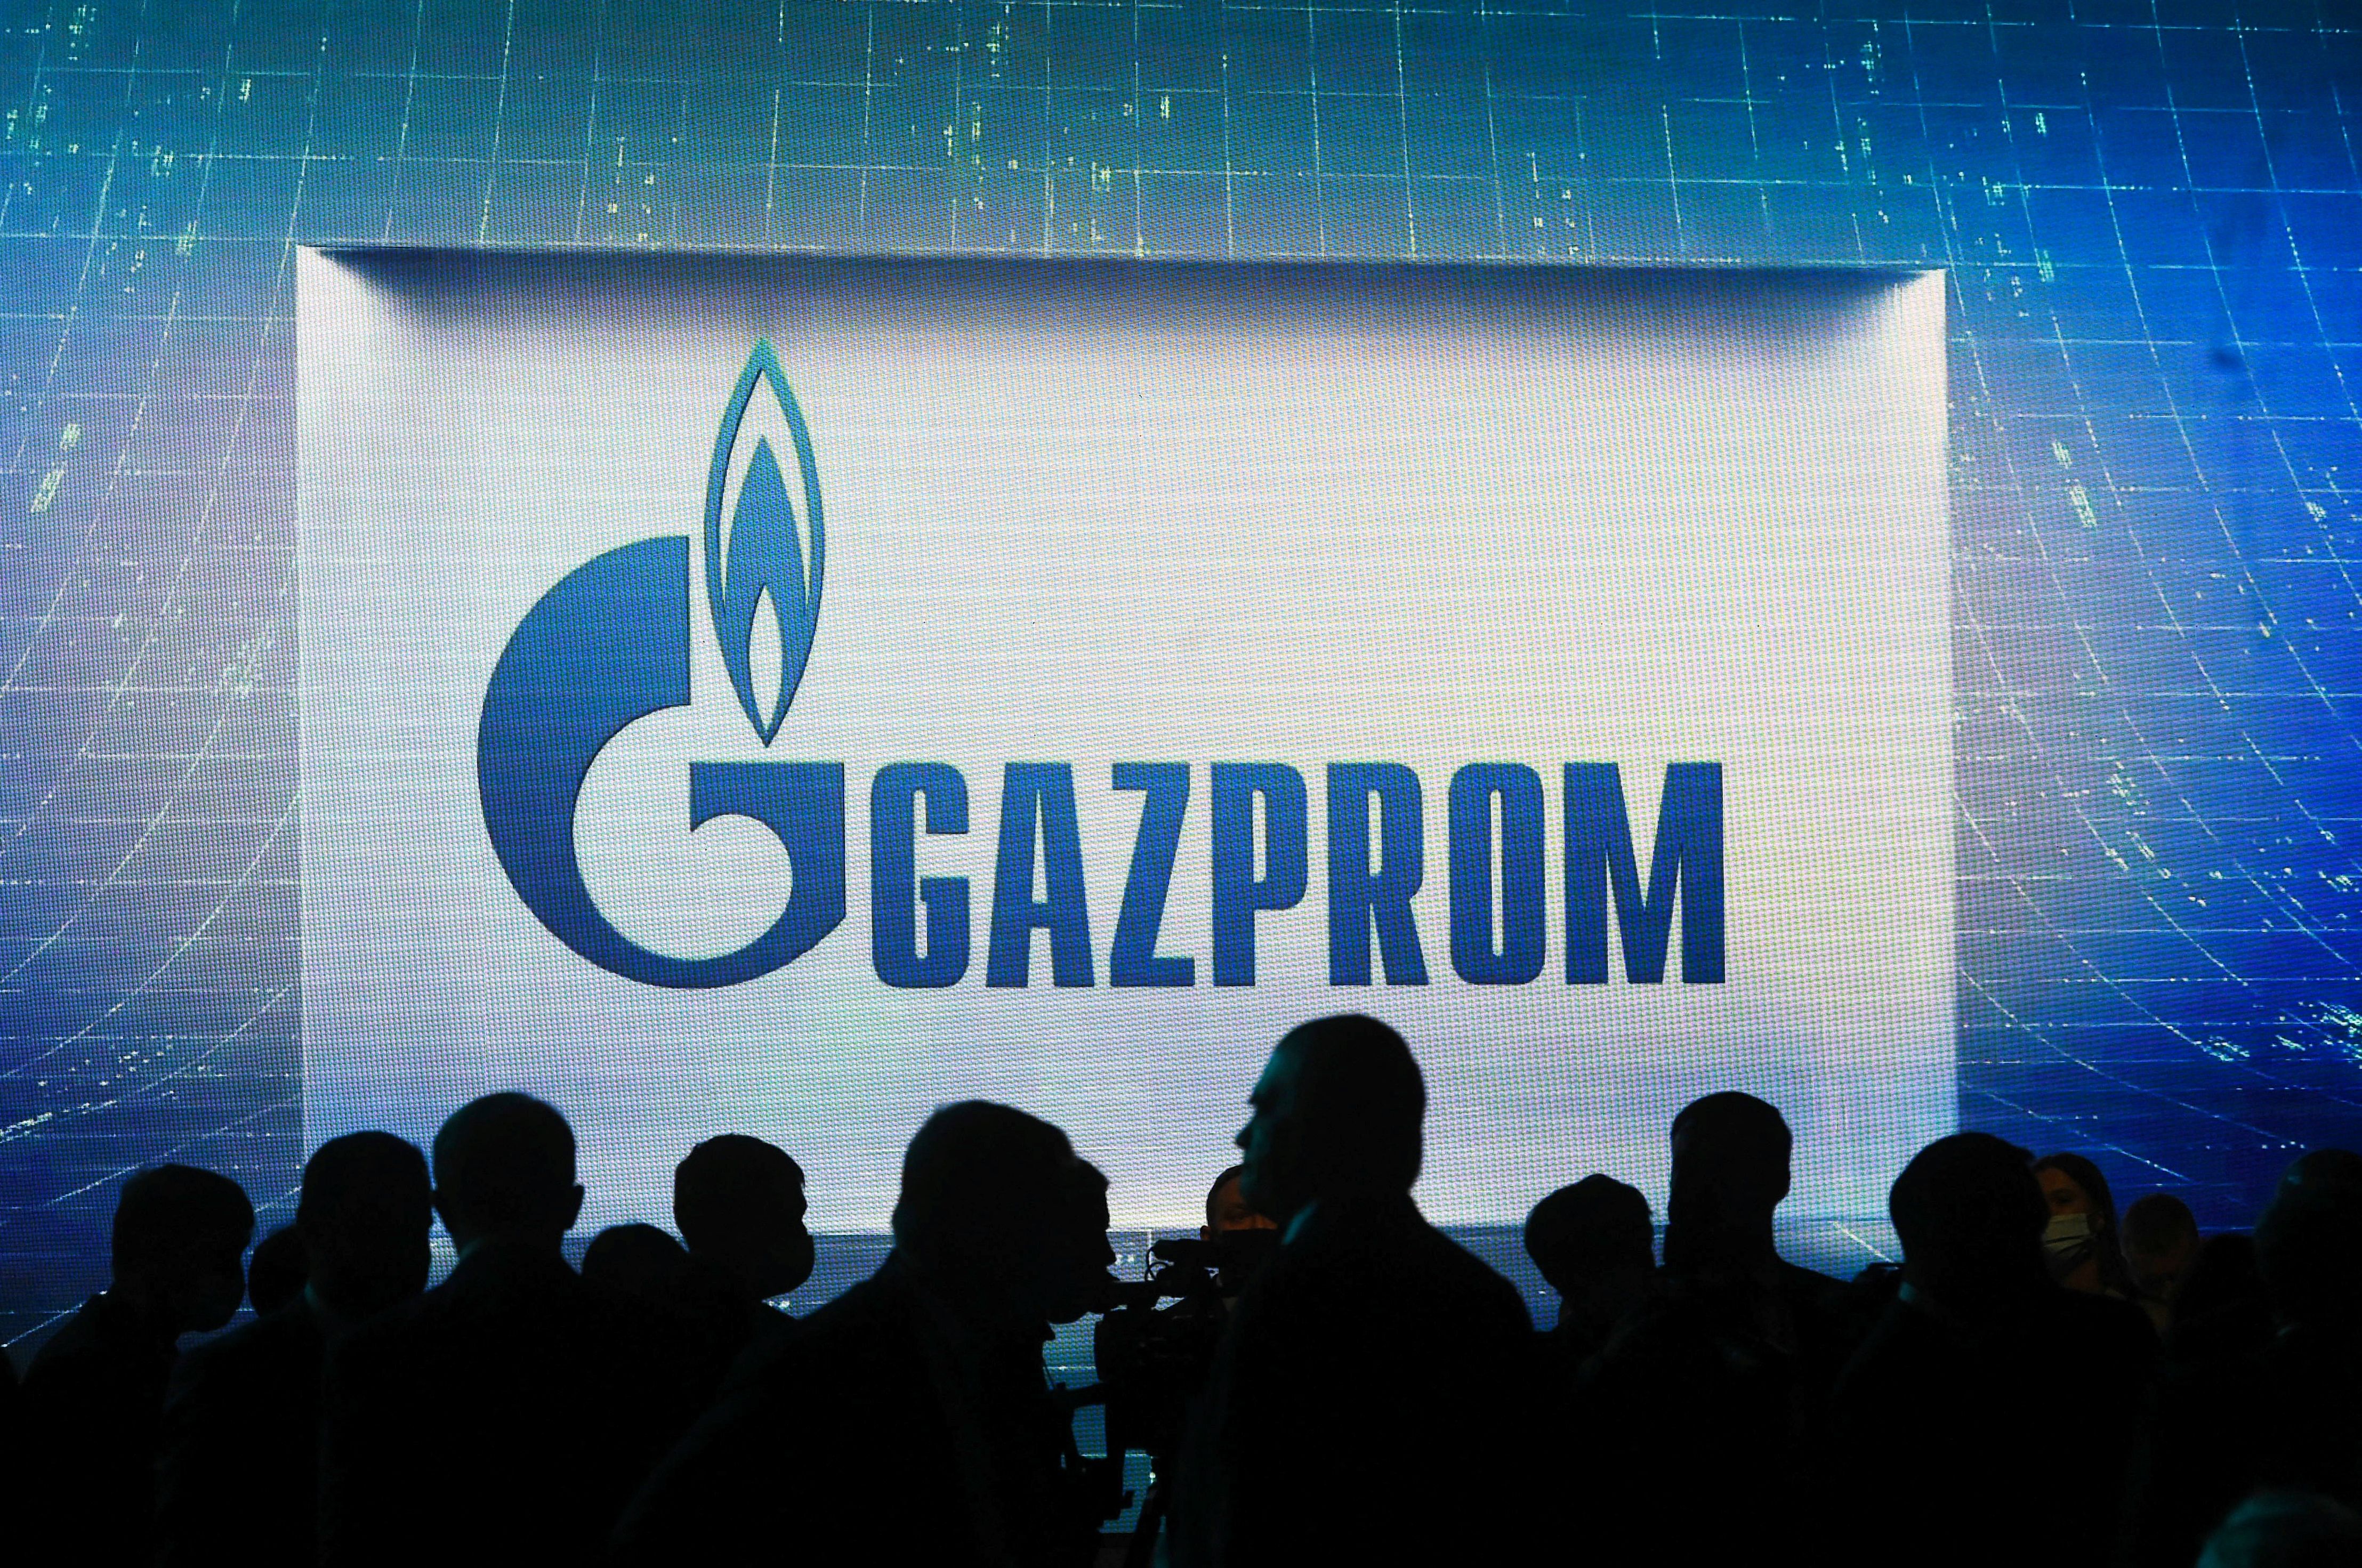 If Gazprom’s UK fails it could be placed into special administration